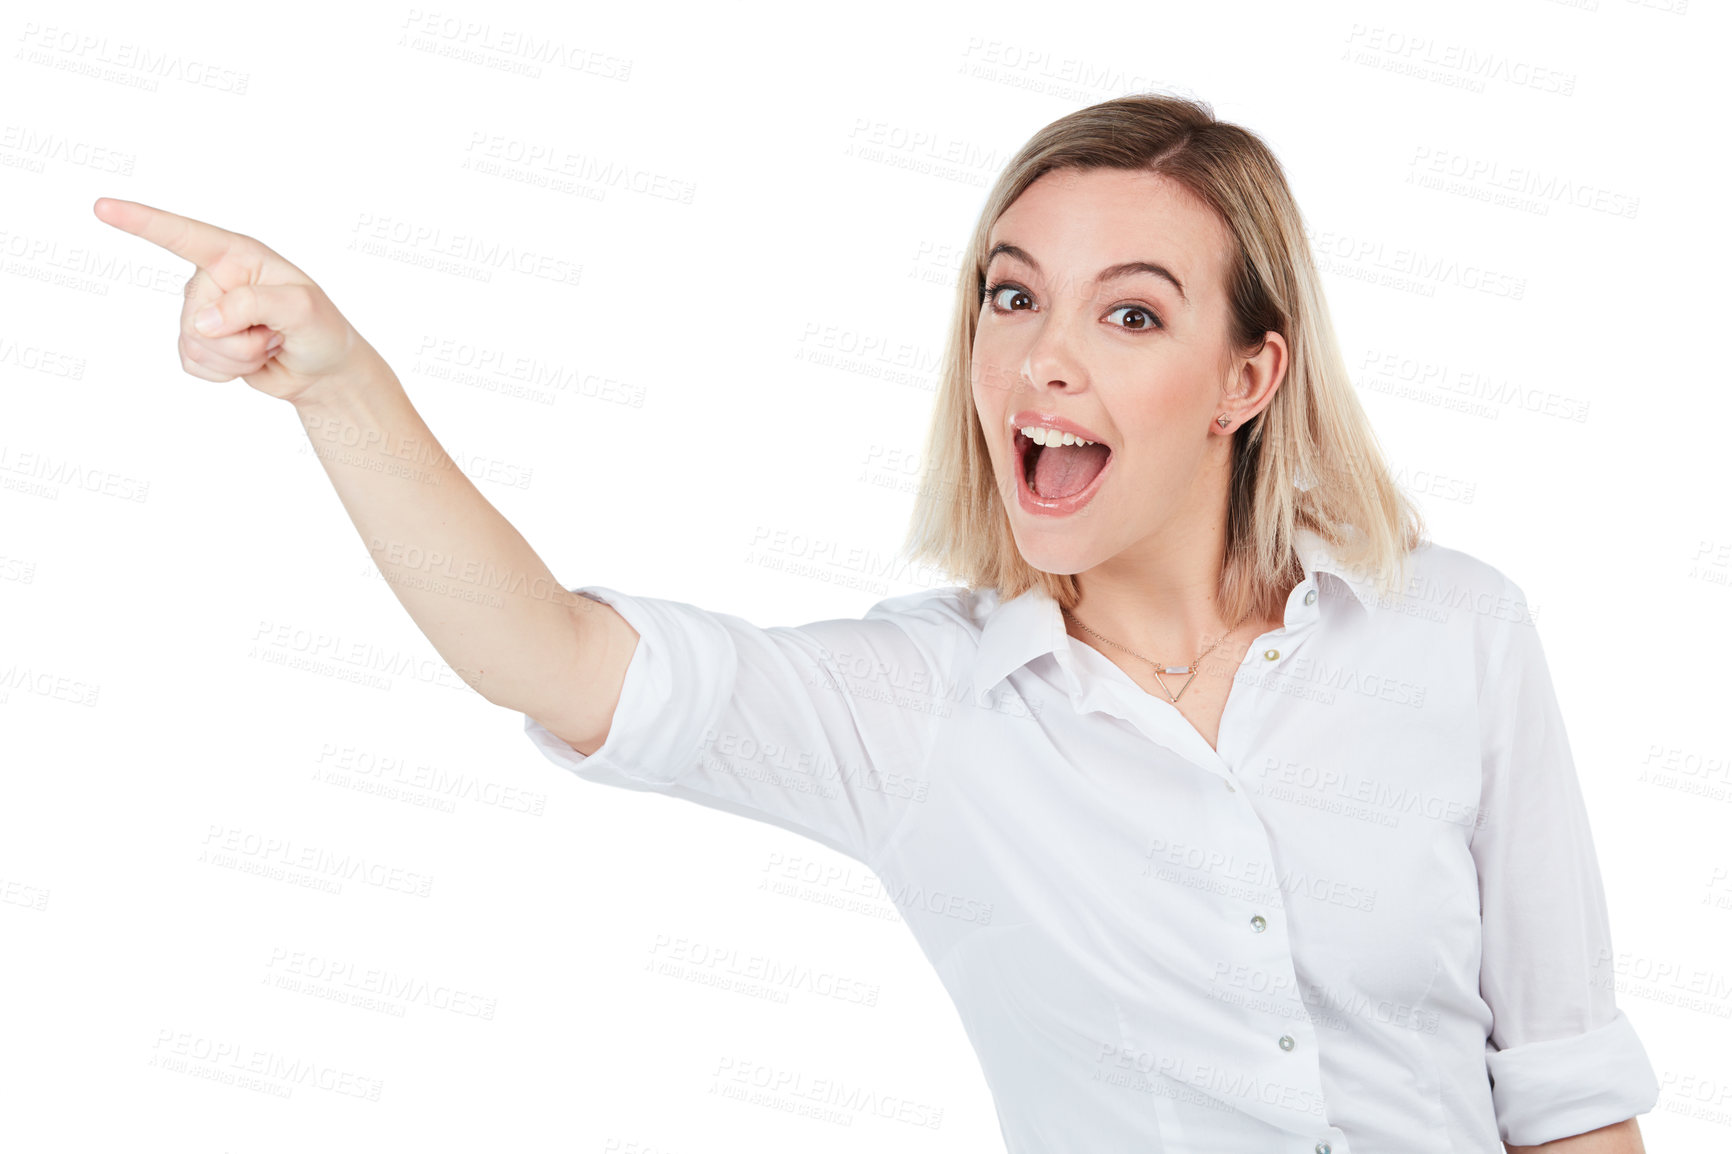 Buy stock photo Advertising, promotion and woman pointing finger on a white background for deal, discount and promo sign. Mockup, display and hand gesture of isolated girl for presenting, sale news and announcement